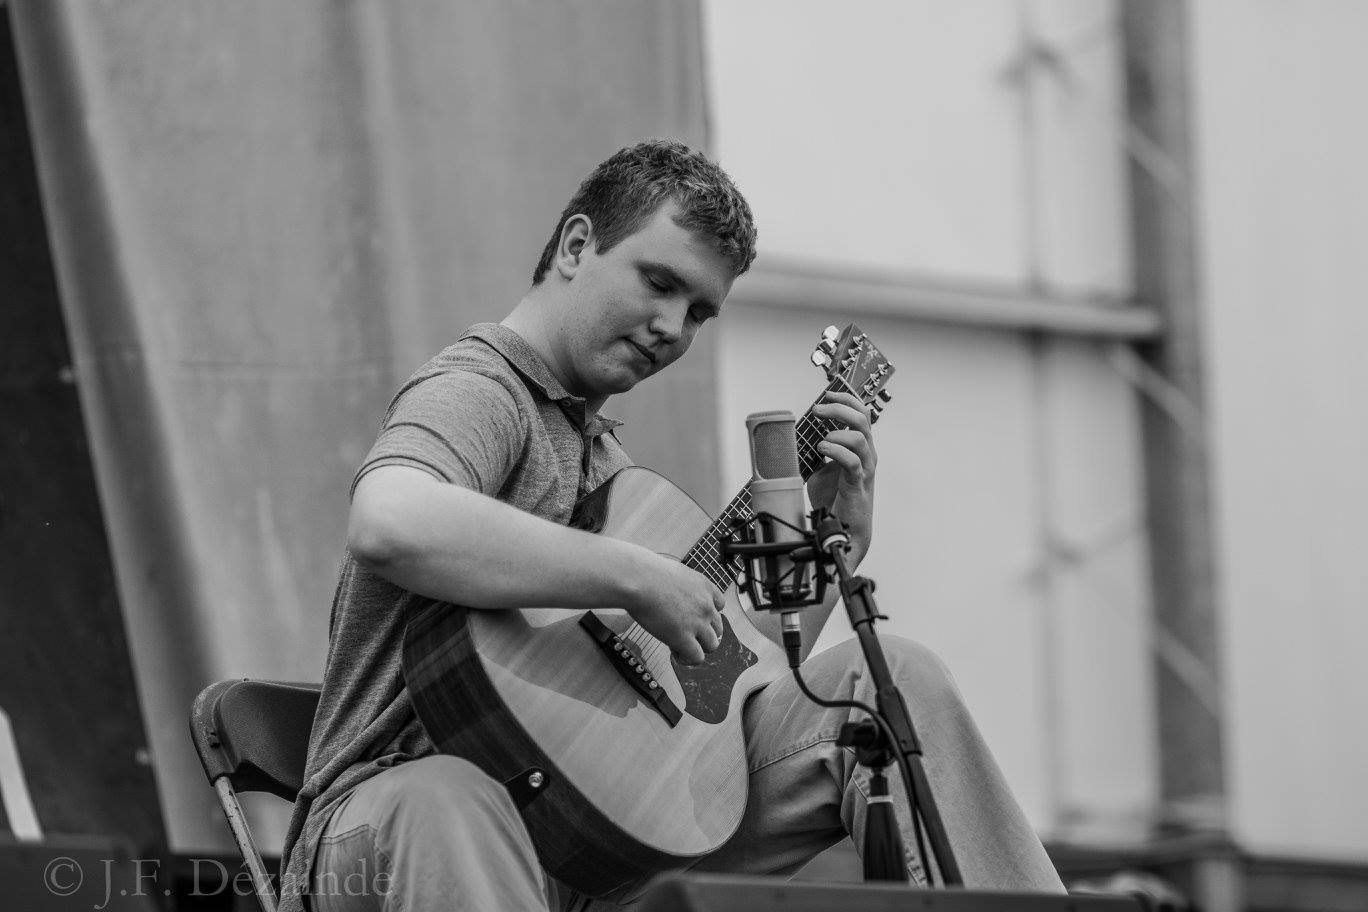 Performing at the 2017 Canadian Guitar Festival